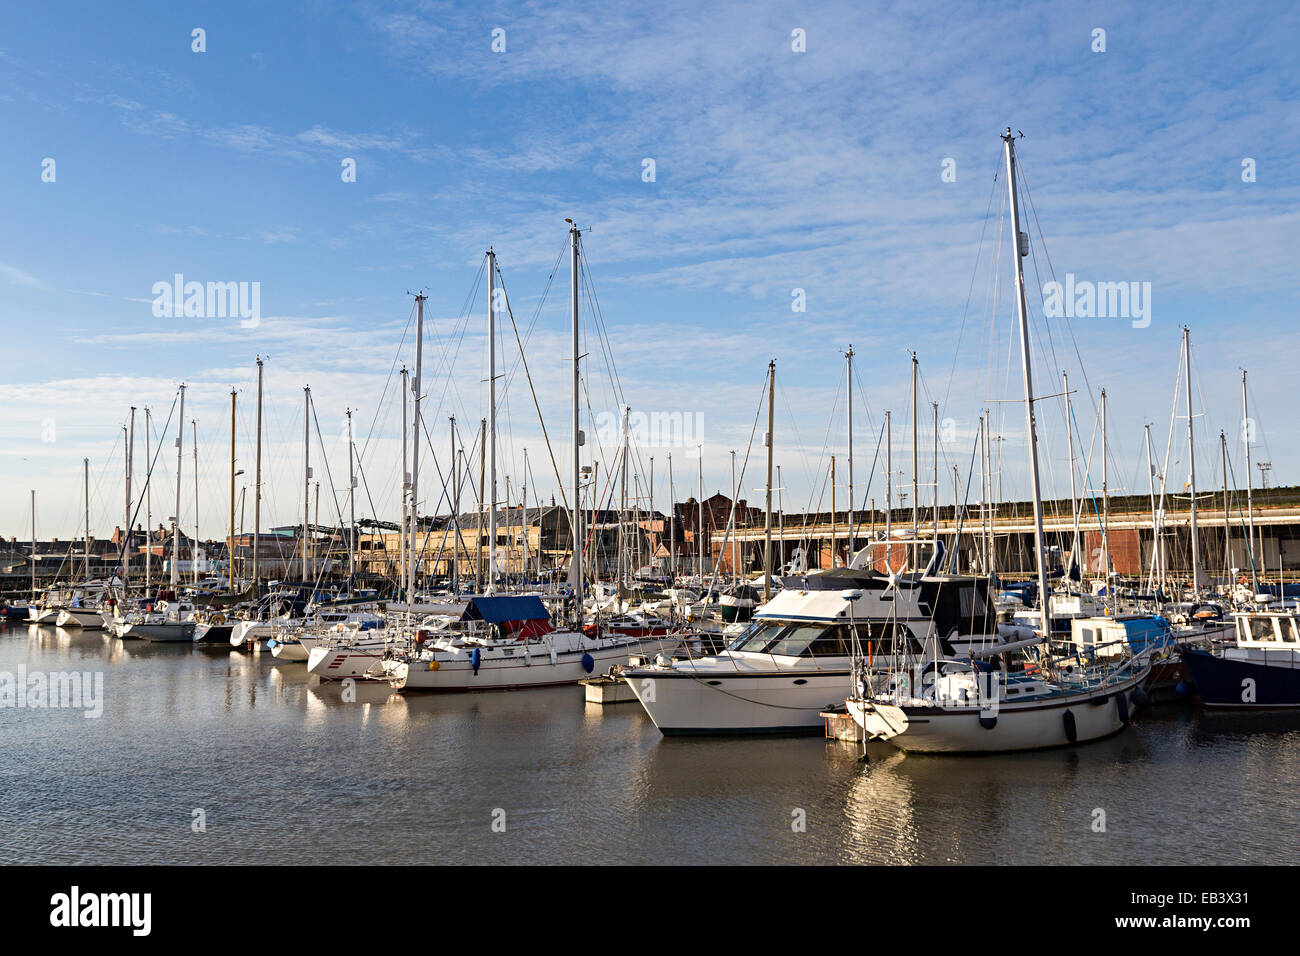 Boote im Yachthafen, Grimsby, Lincolnshire, England, UK Stockfoto